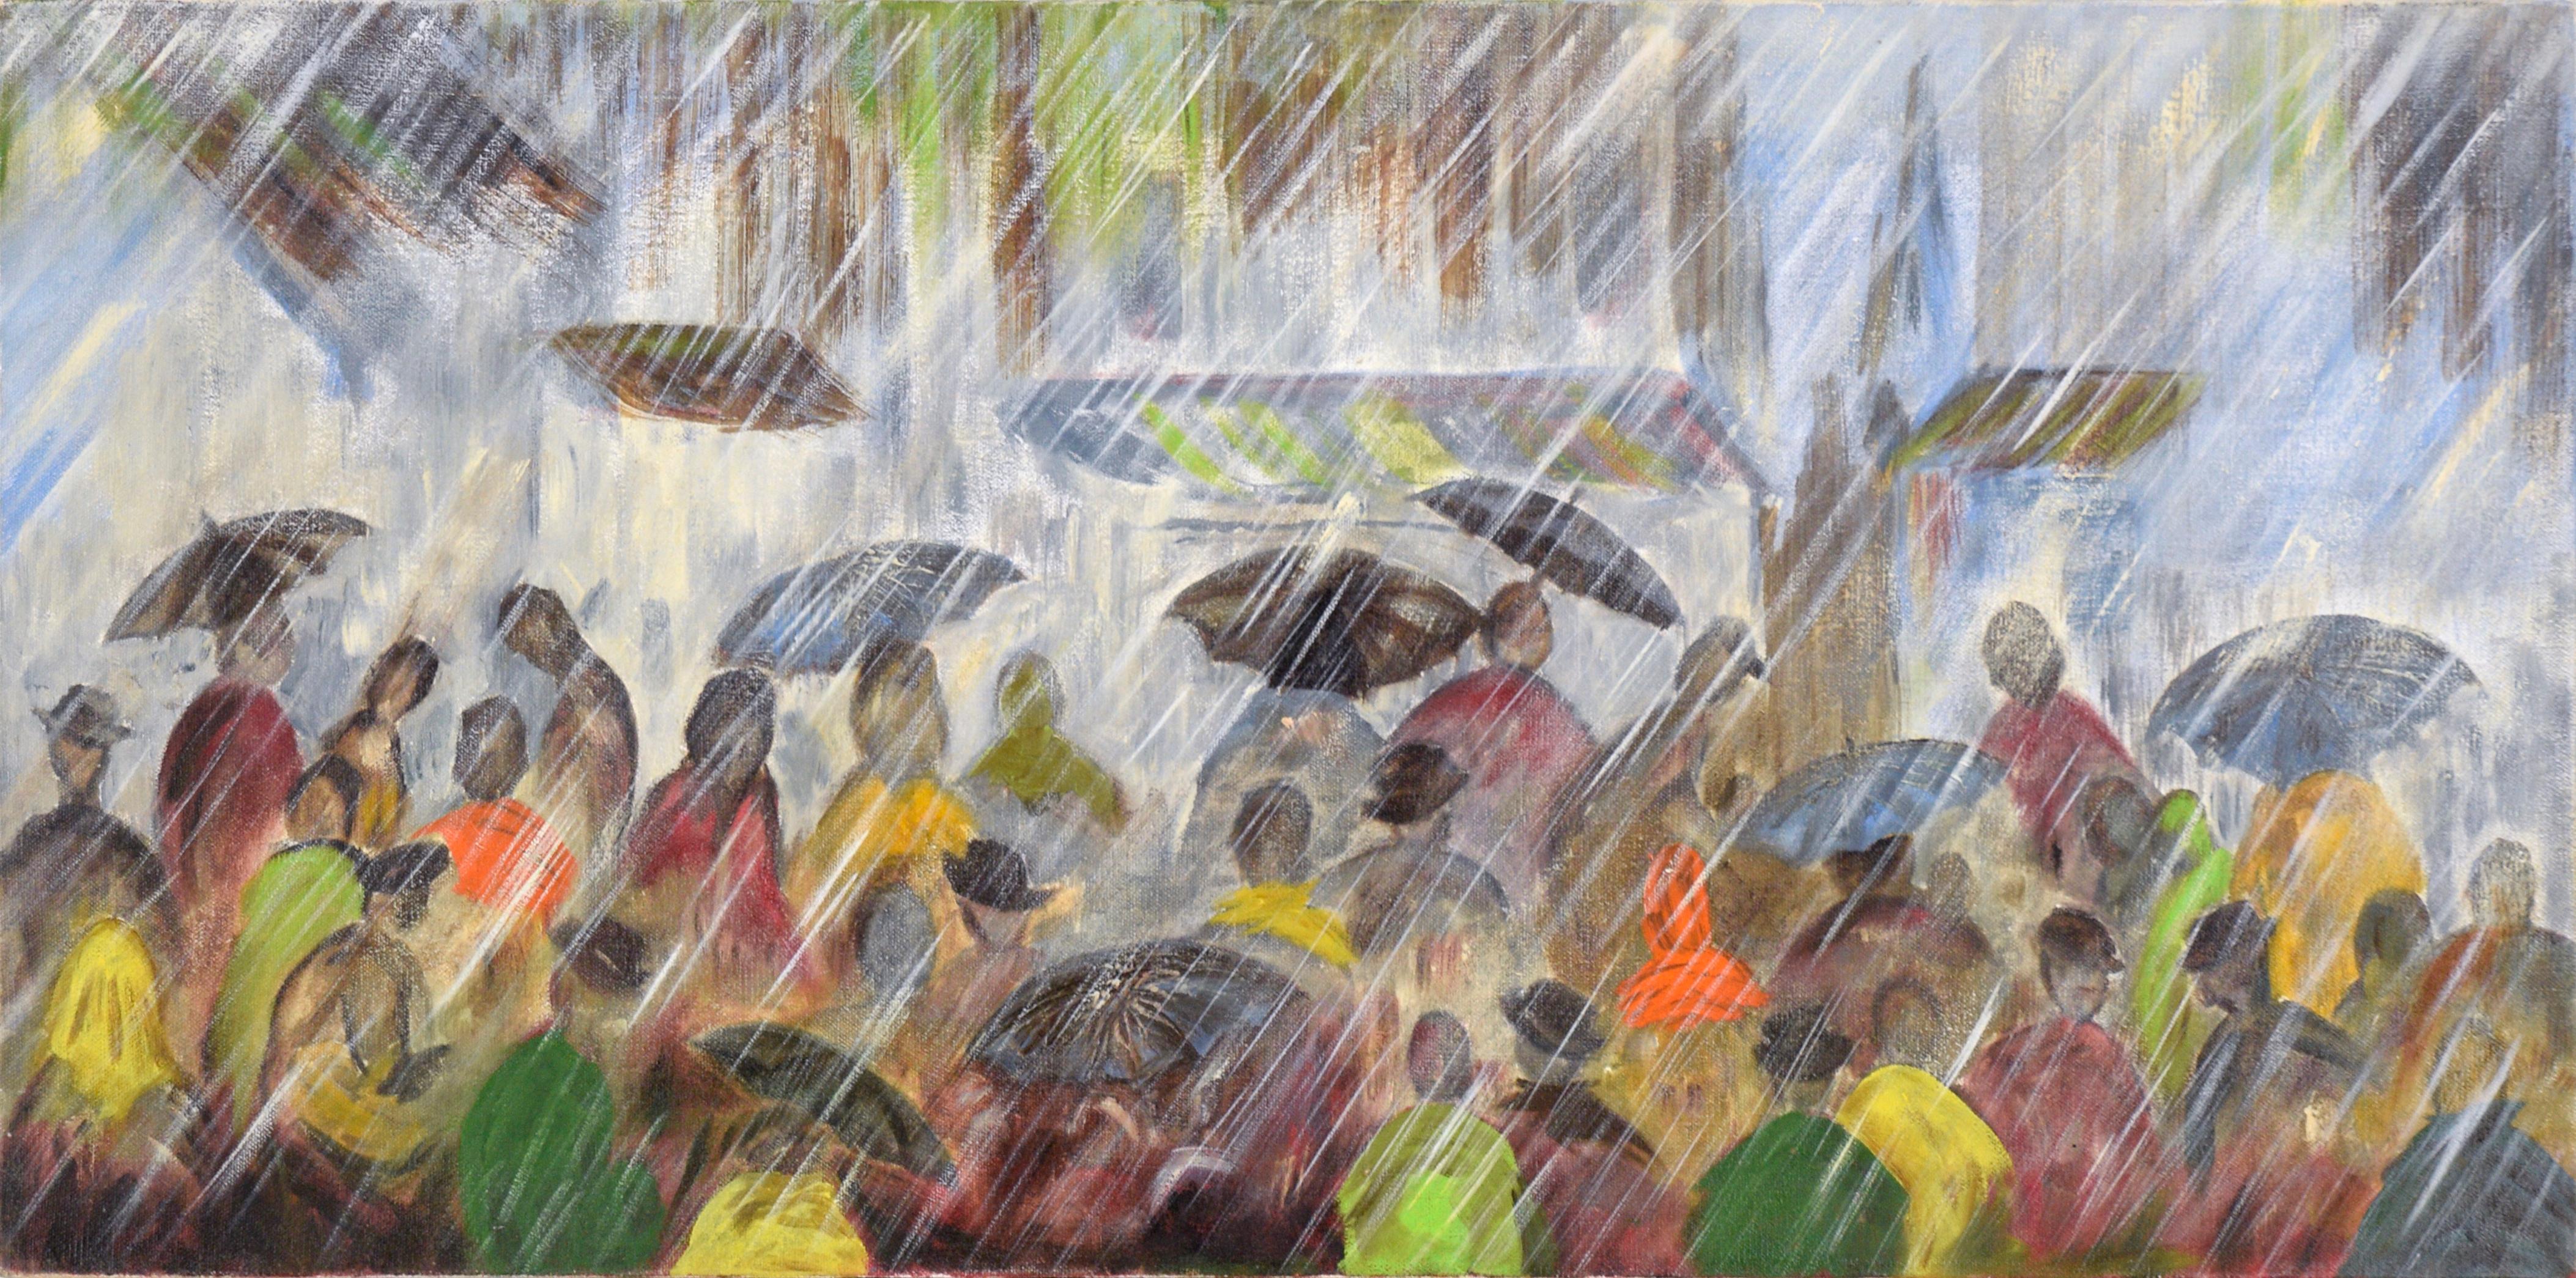 Pouring Down in the Streets - Paysage urbain pluvieux